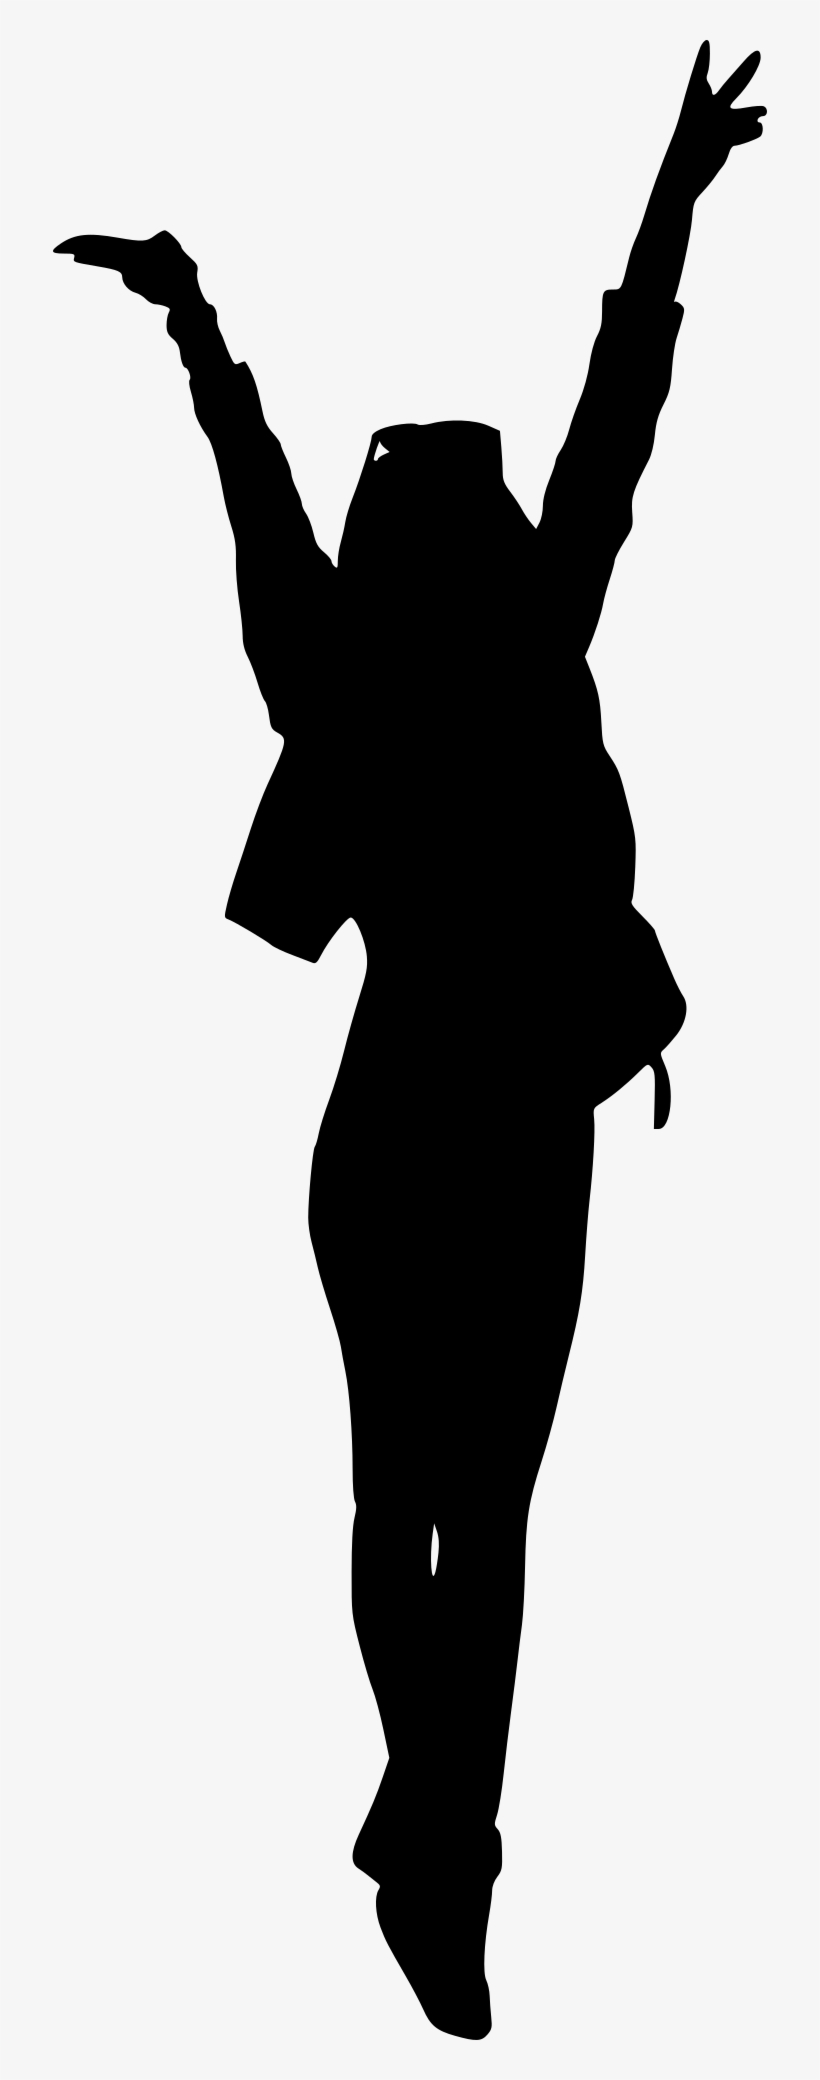 Hands Up Png - Woman Hands Up Silhouette, transparent png #445987